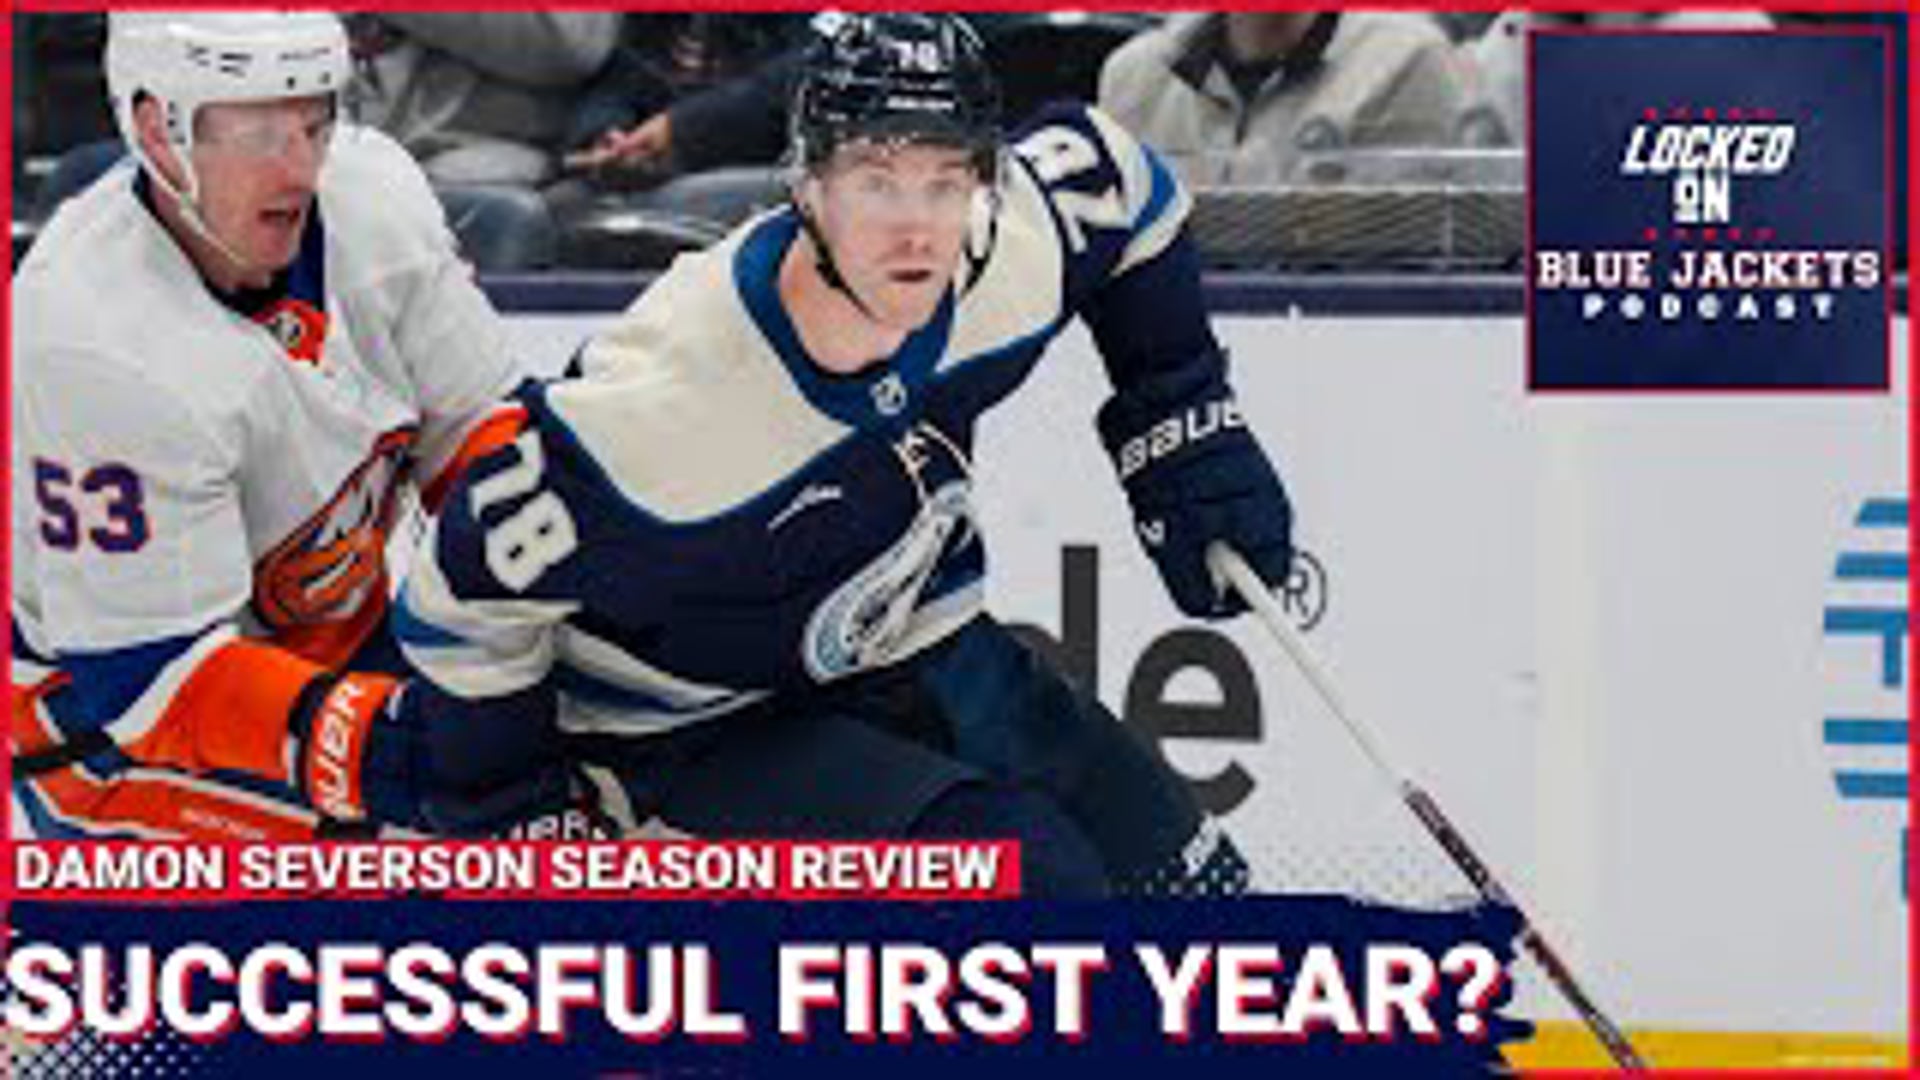 Damon Severson had some ups and some downs in his first season in Columbus, but mostly good. Now the questions become how can he improve next season.